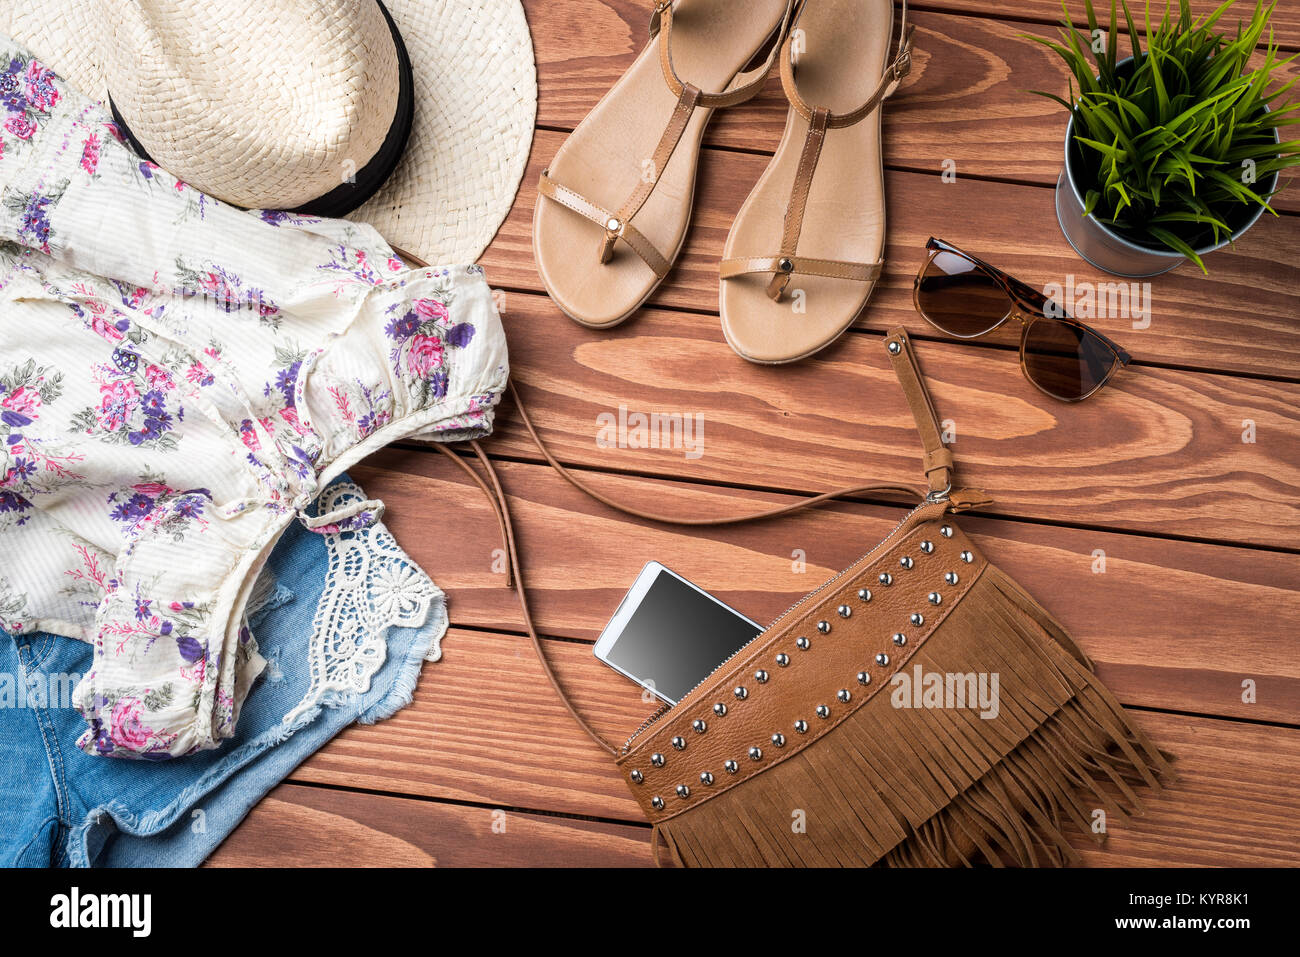 Women's summer clothes on wooden table. Fashion background Stock Photo